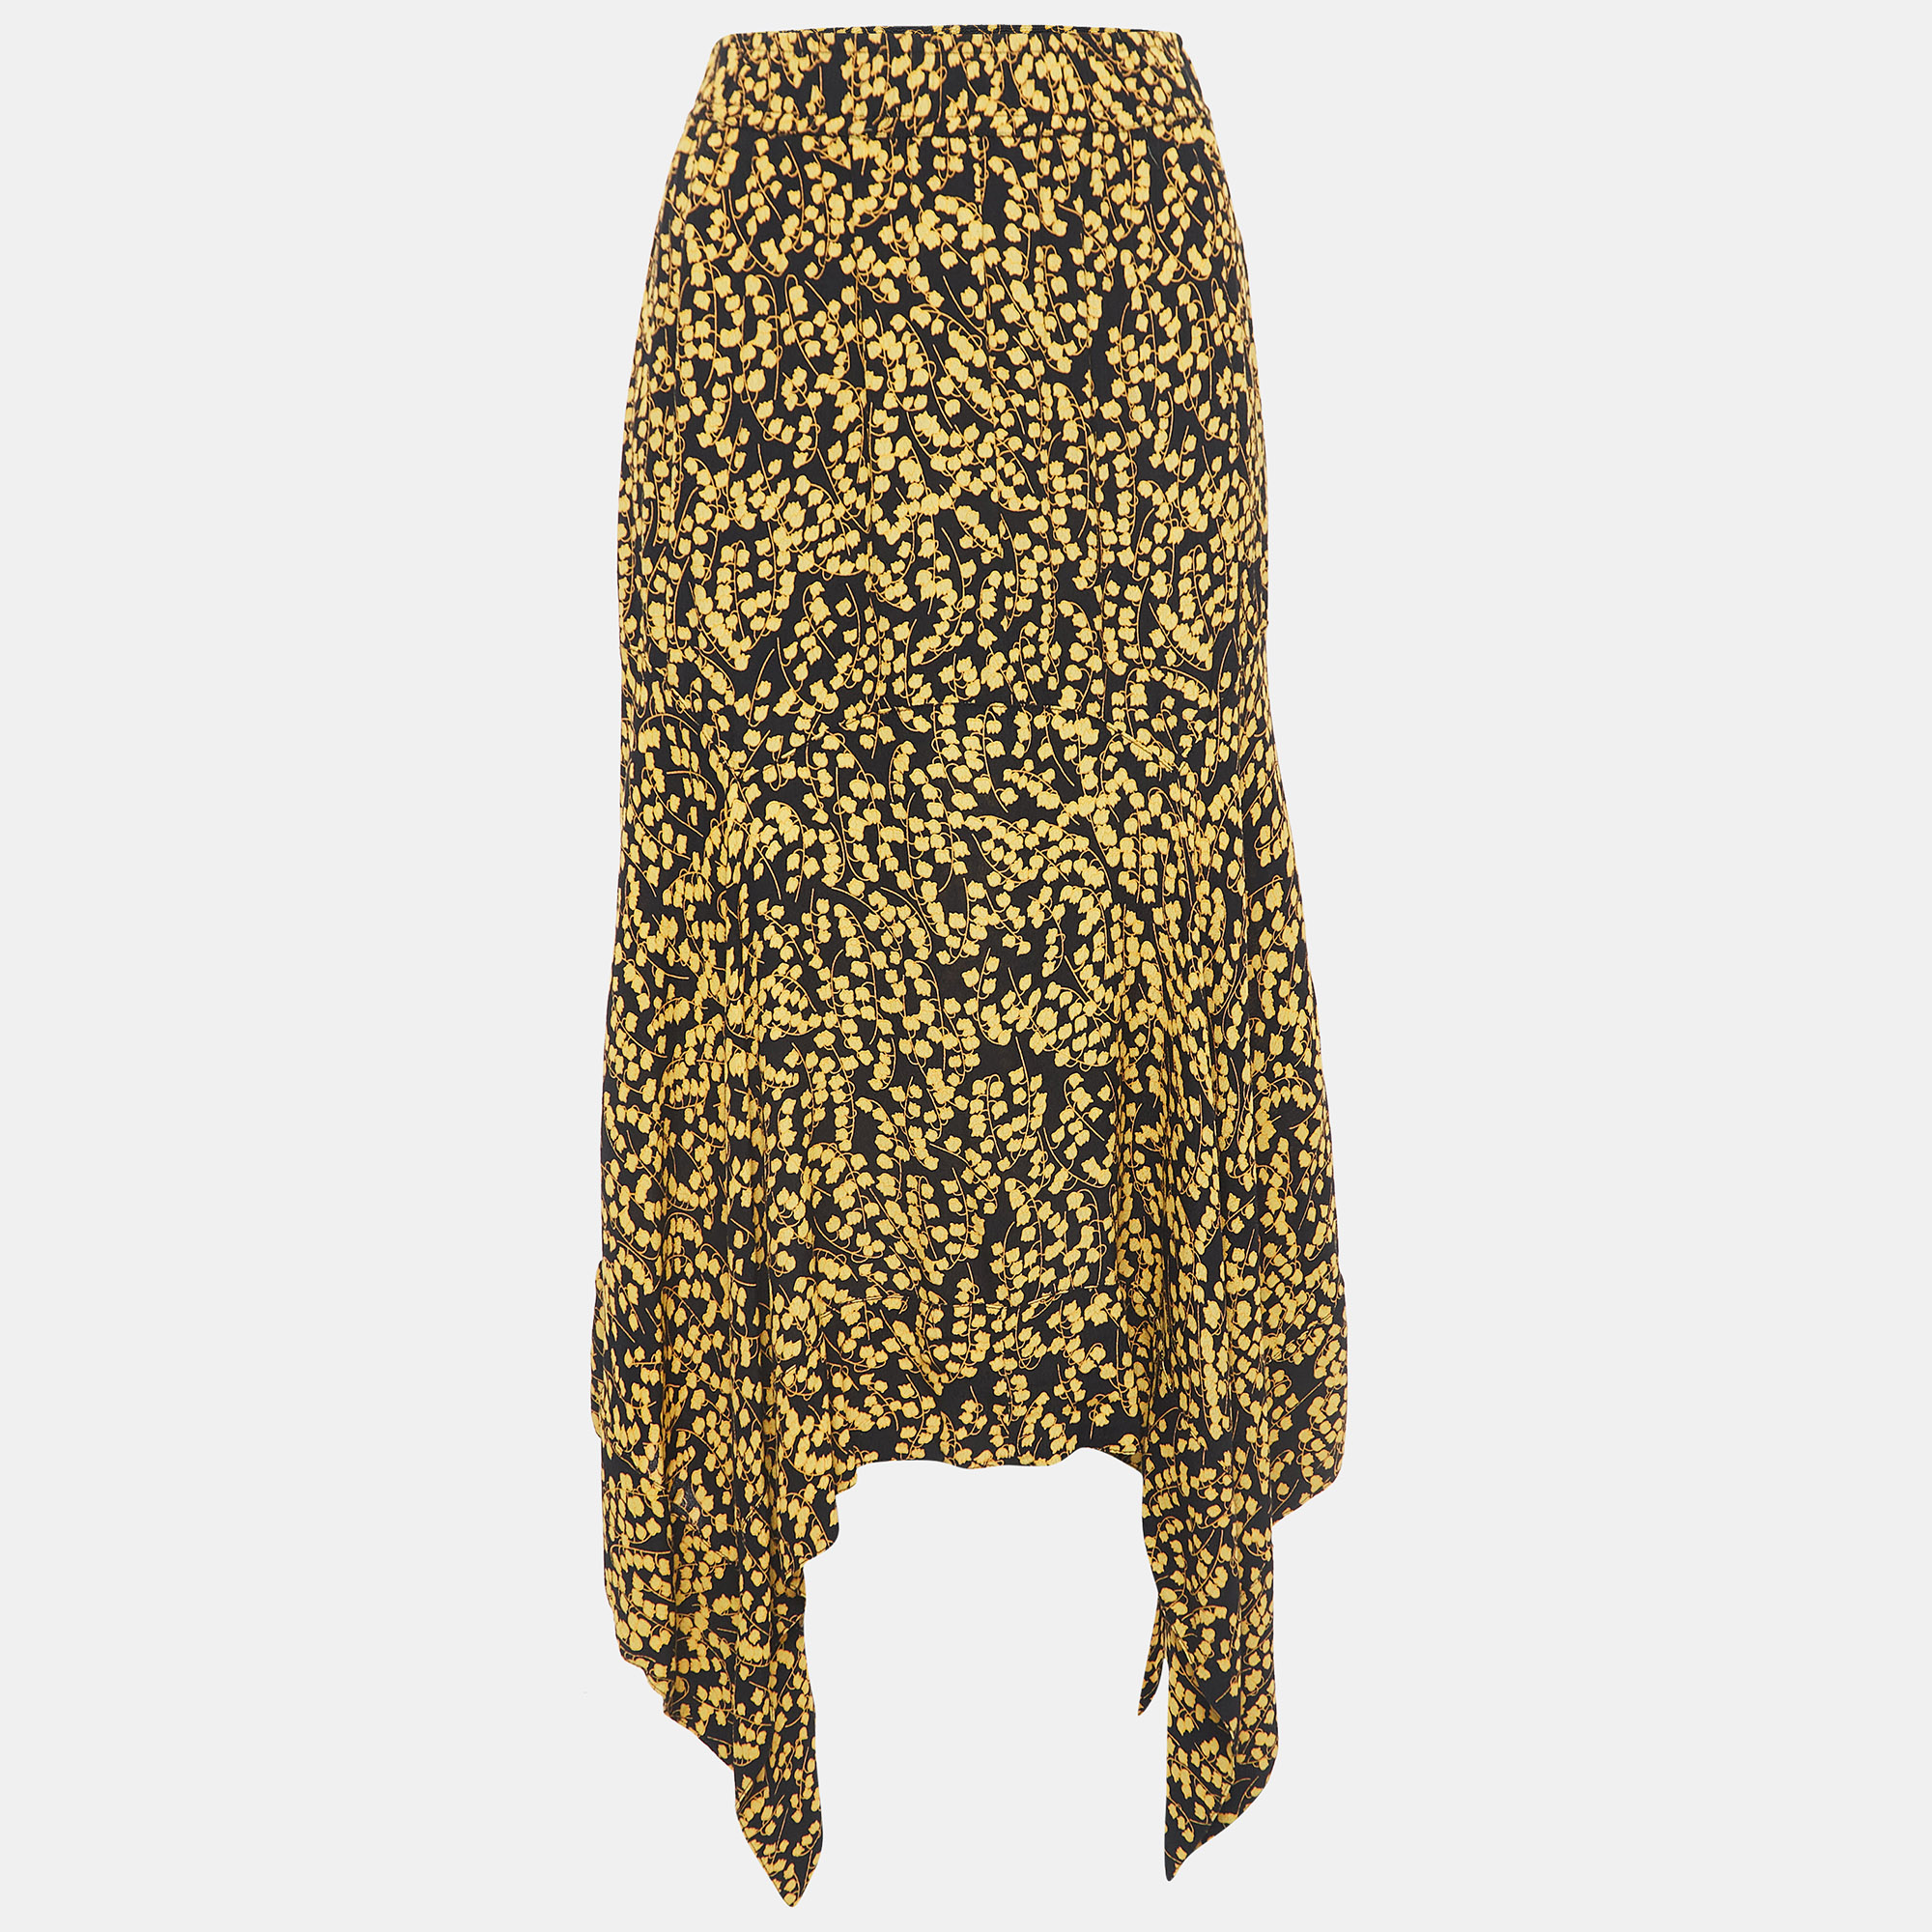 Pre-owned Ganni Black/yellow Floral Printed Crepe Asymmetrical Skirt L